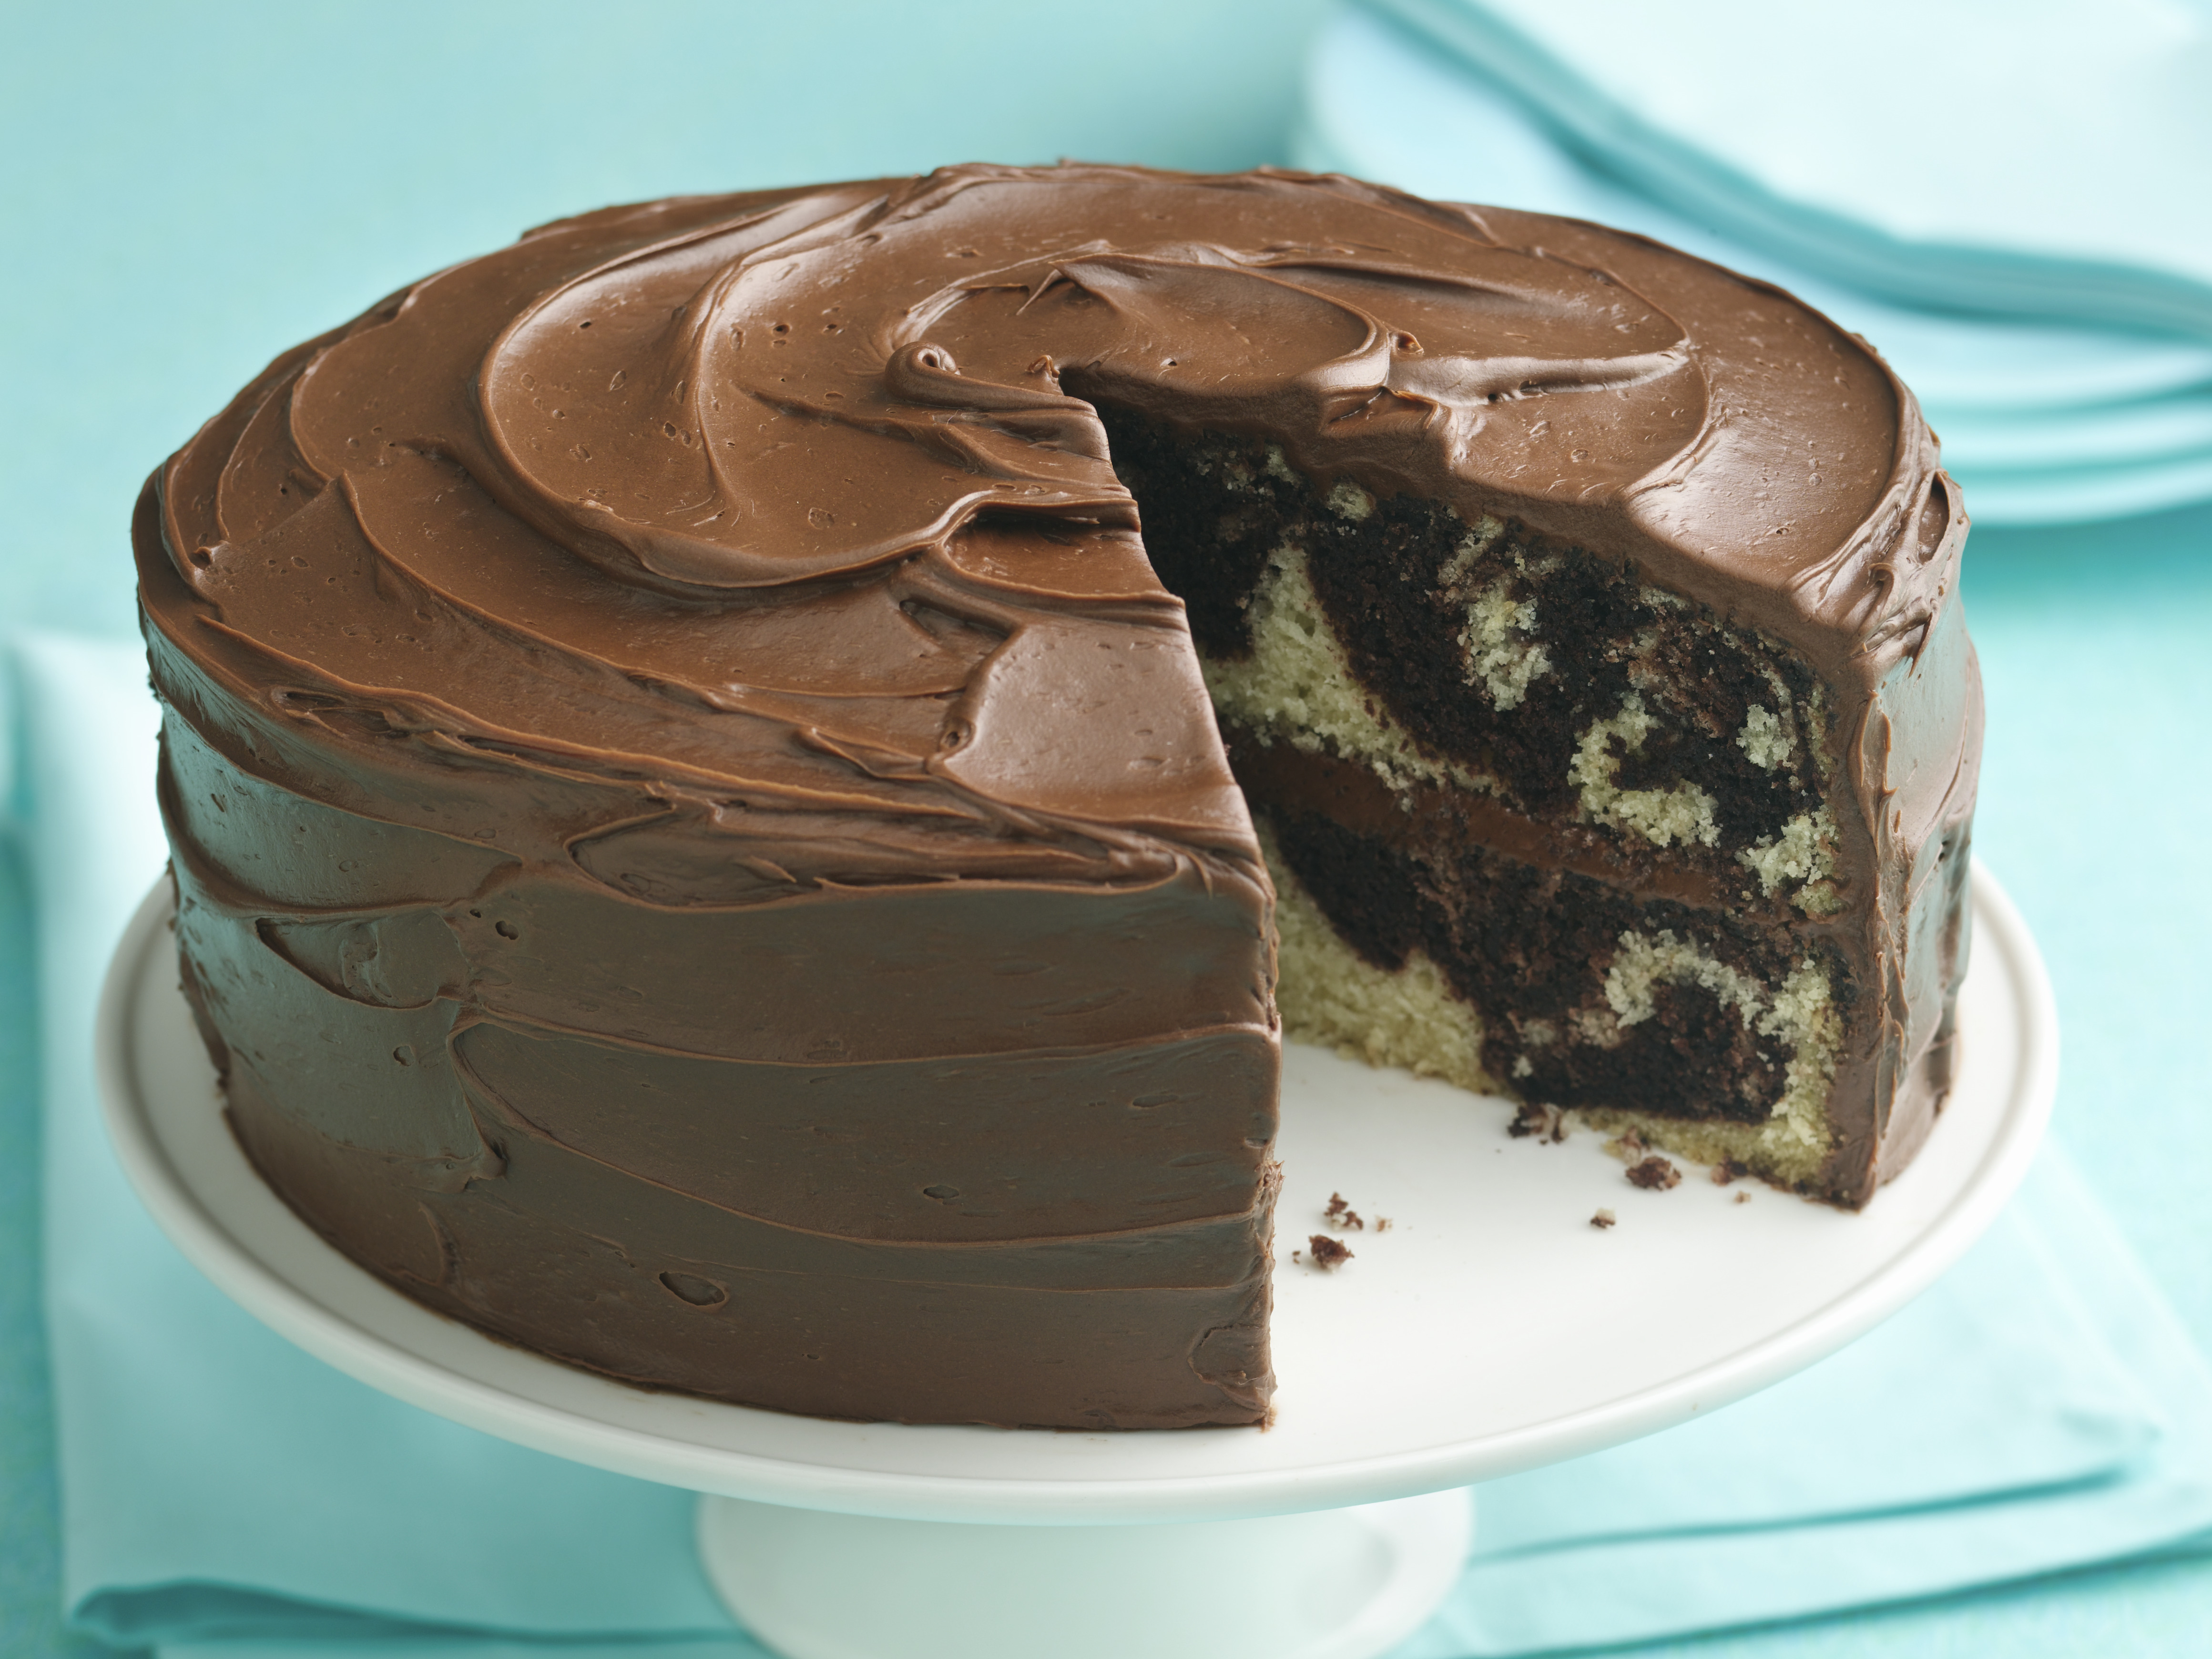 Marble Layer Cake - Pies and Tacos